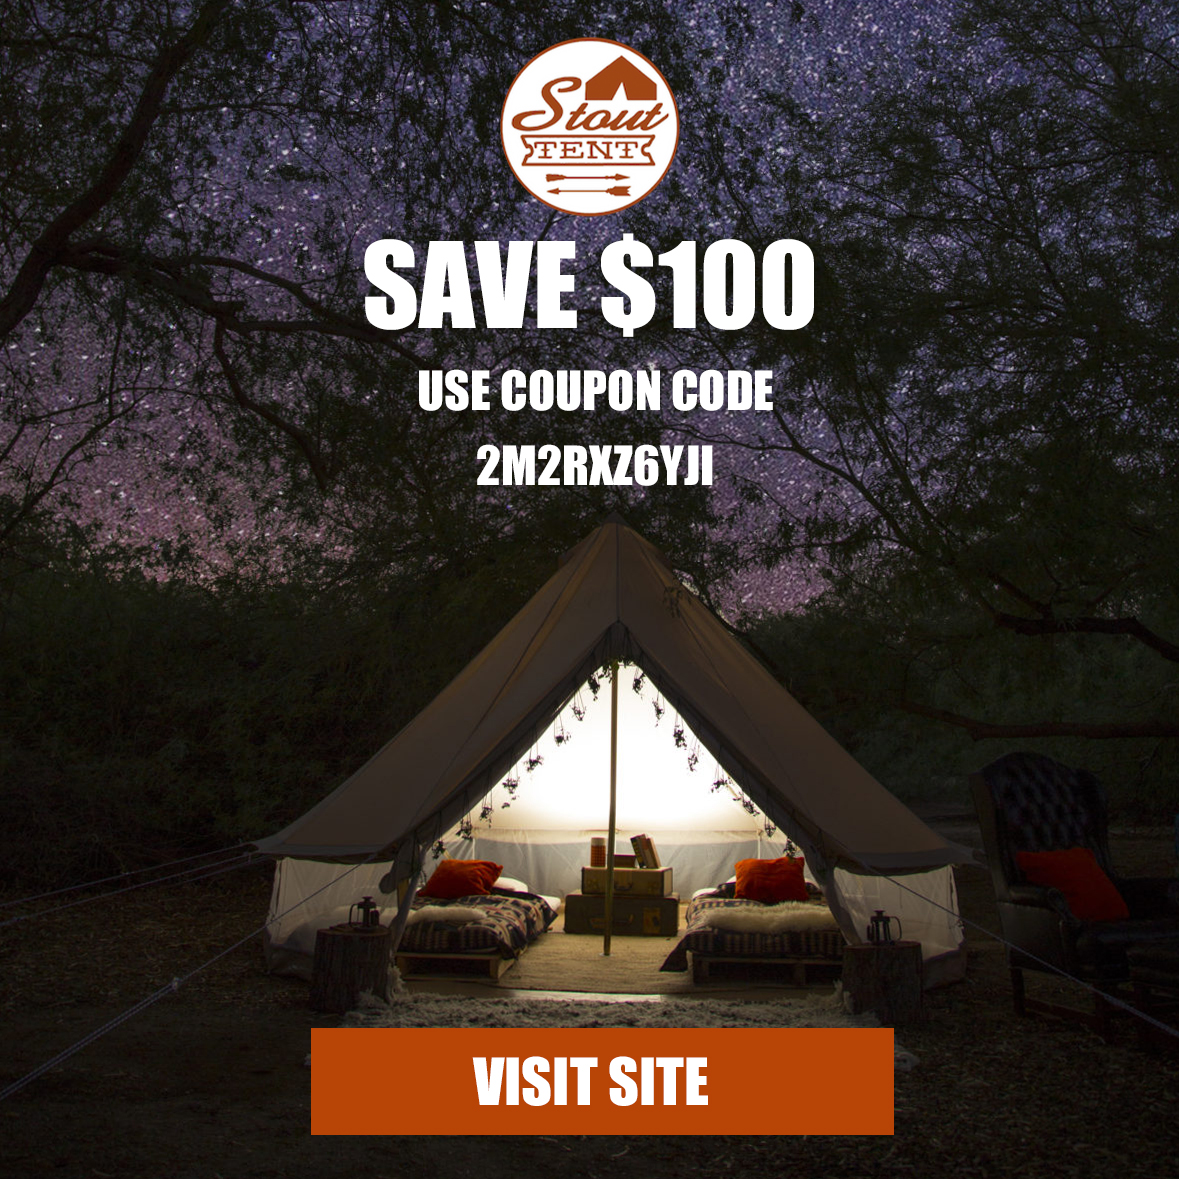 Save $100 on Stout Bell Tents